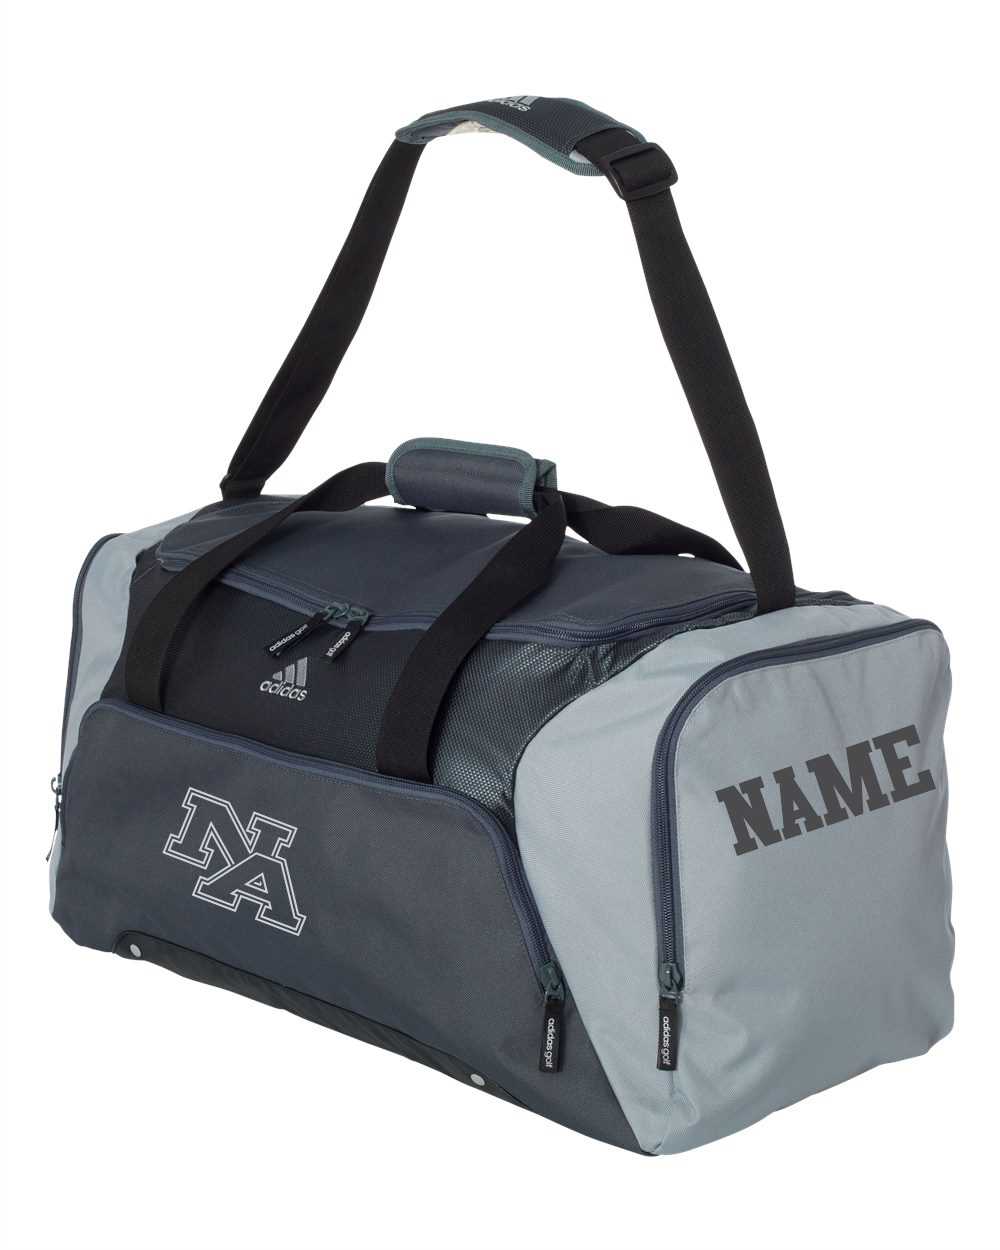 Adidas Duffel Bag with NA Athletic logo and optional personalization! (2 colors, Limited Quantities Available)